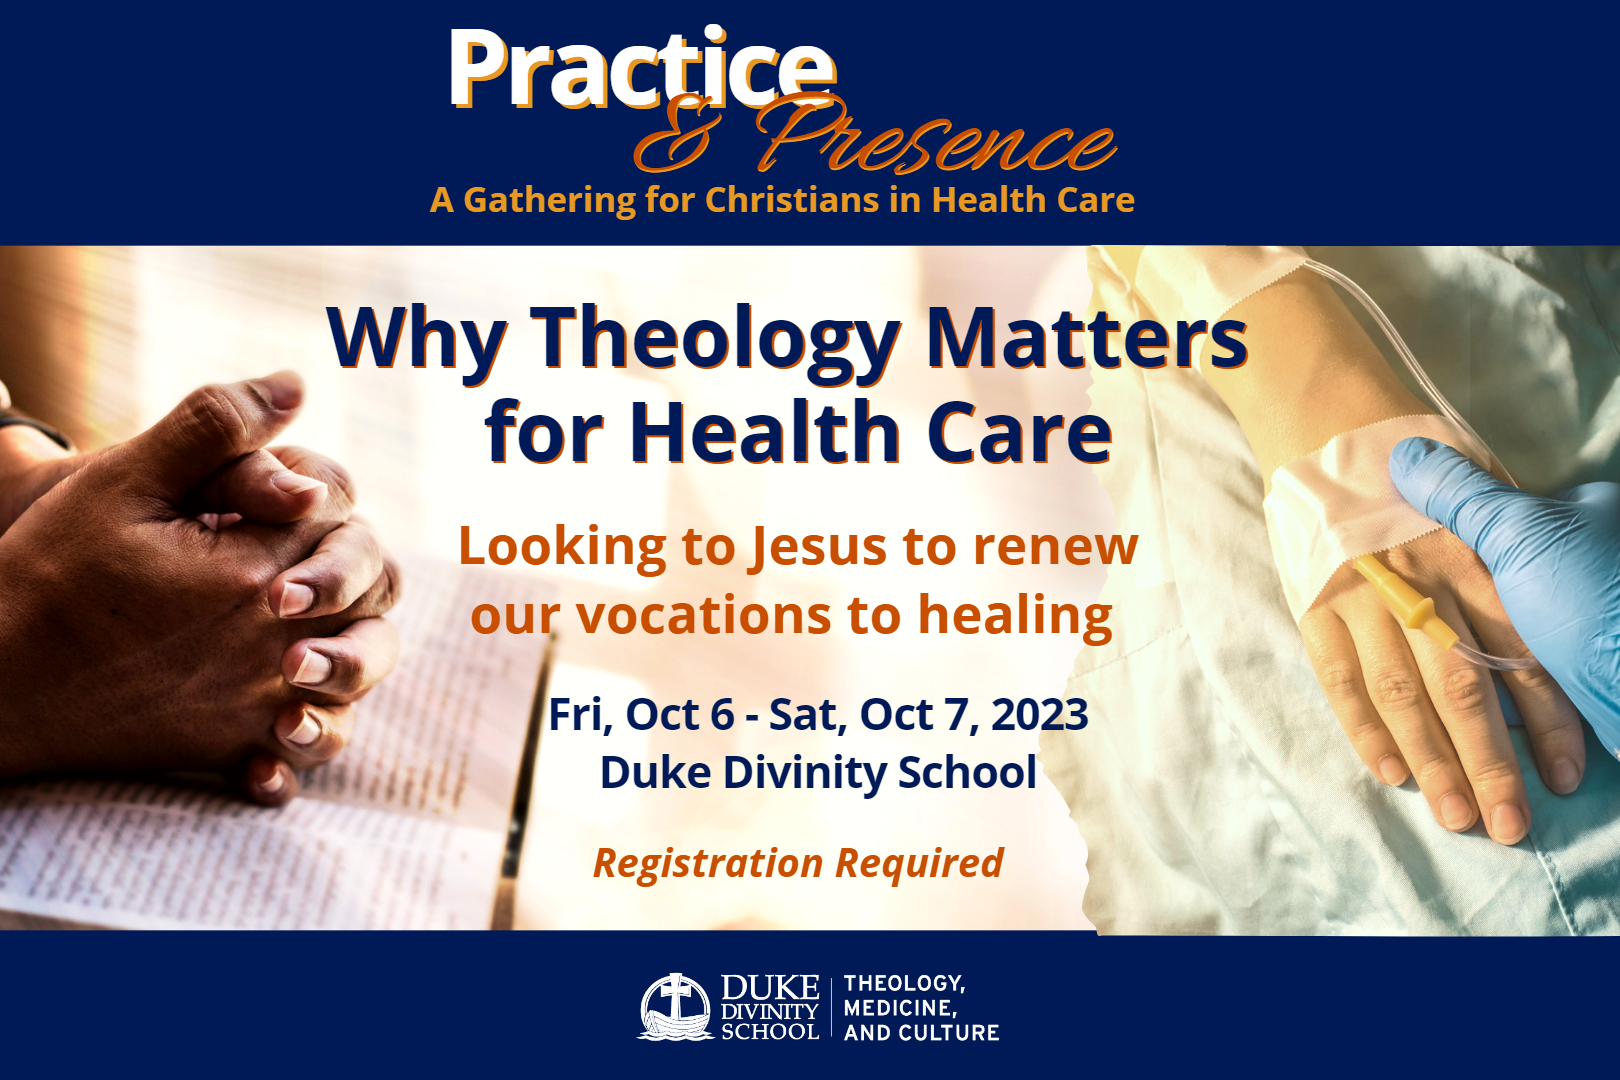 Practice and Presence: A Gathering for Christians in Health Care. Why Theology Matters for Health Care. Subtitle: Looking to Jesus to renew our vocations to healing. Fri, Oct 6 - Sat, Oct 7, 2023, Duke Divinity School. Registration Required. Duke Divinity School Theology Medicine and Culture Initiative Logo. Image of hands praying. Image of hand with IV and medical worker in glove.